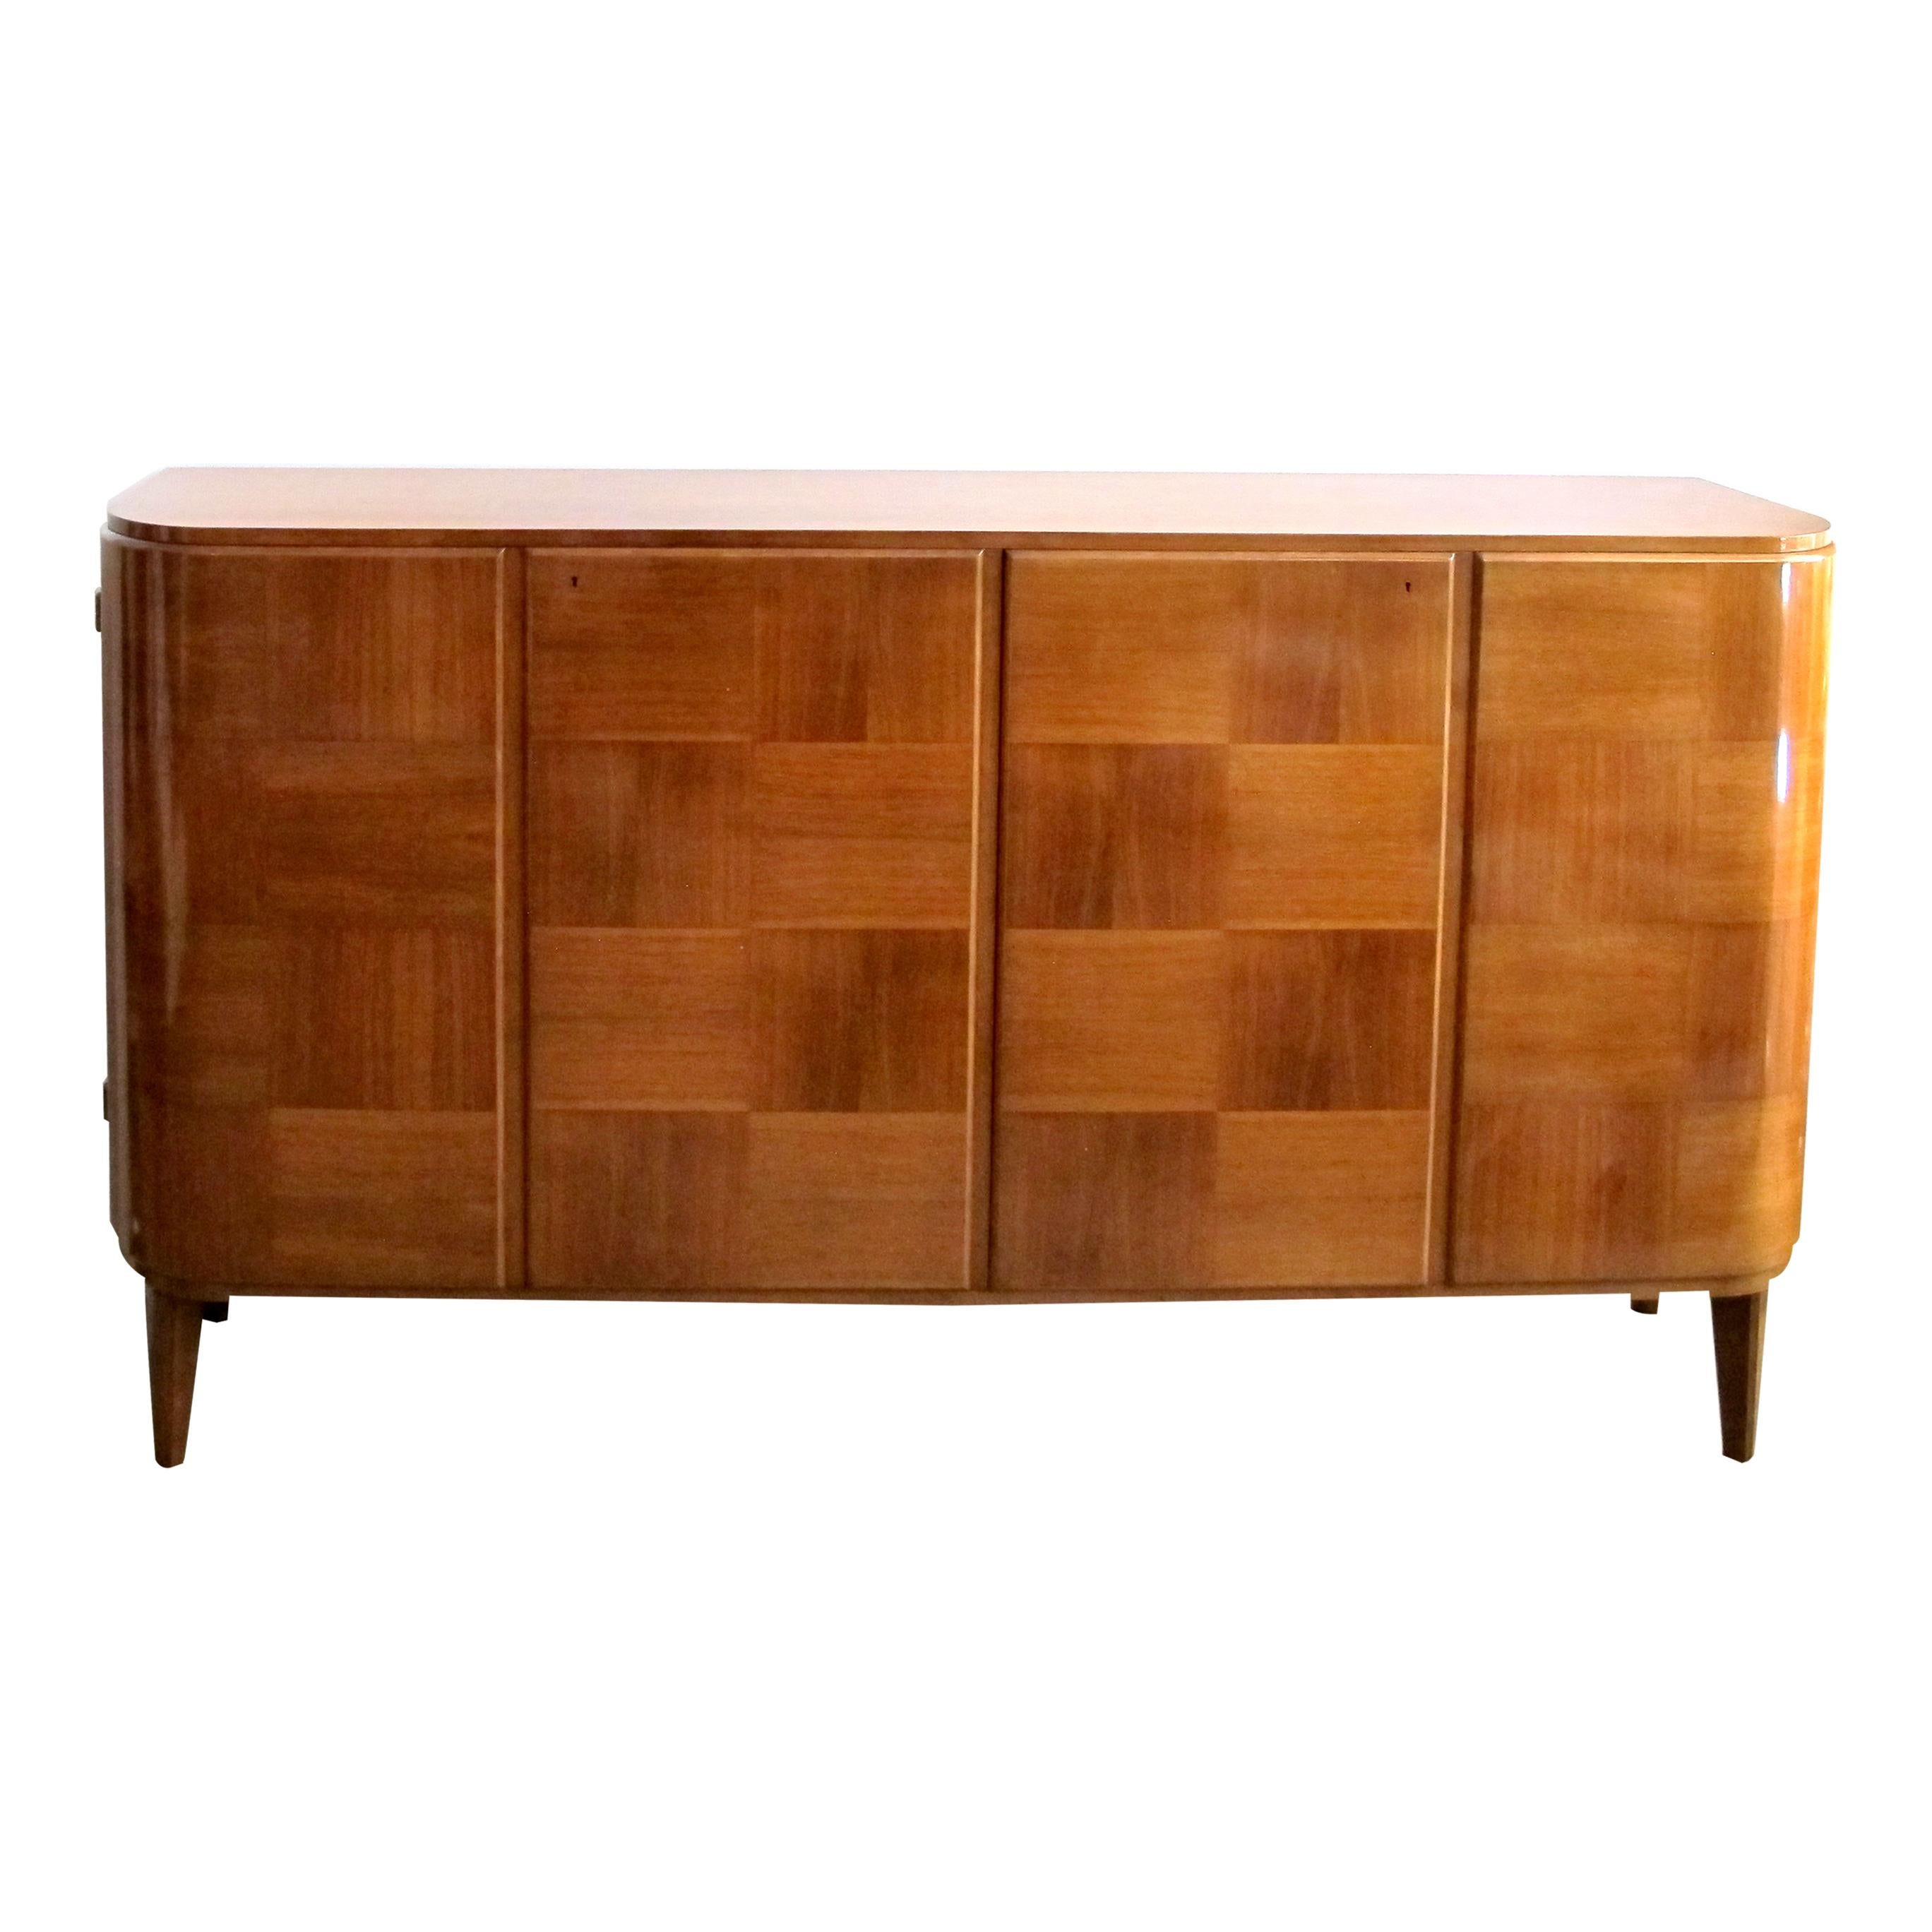 1930s/40s Art Deco Sideboard with Curved edges by Carl Axel Acking for Bodafors